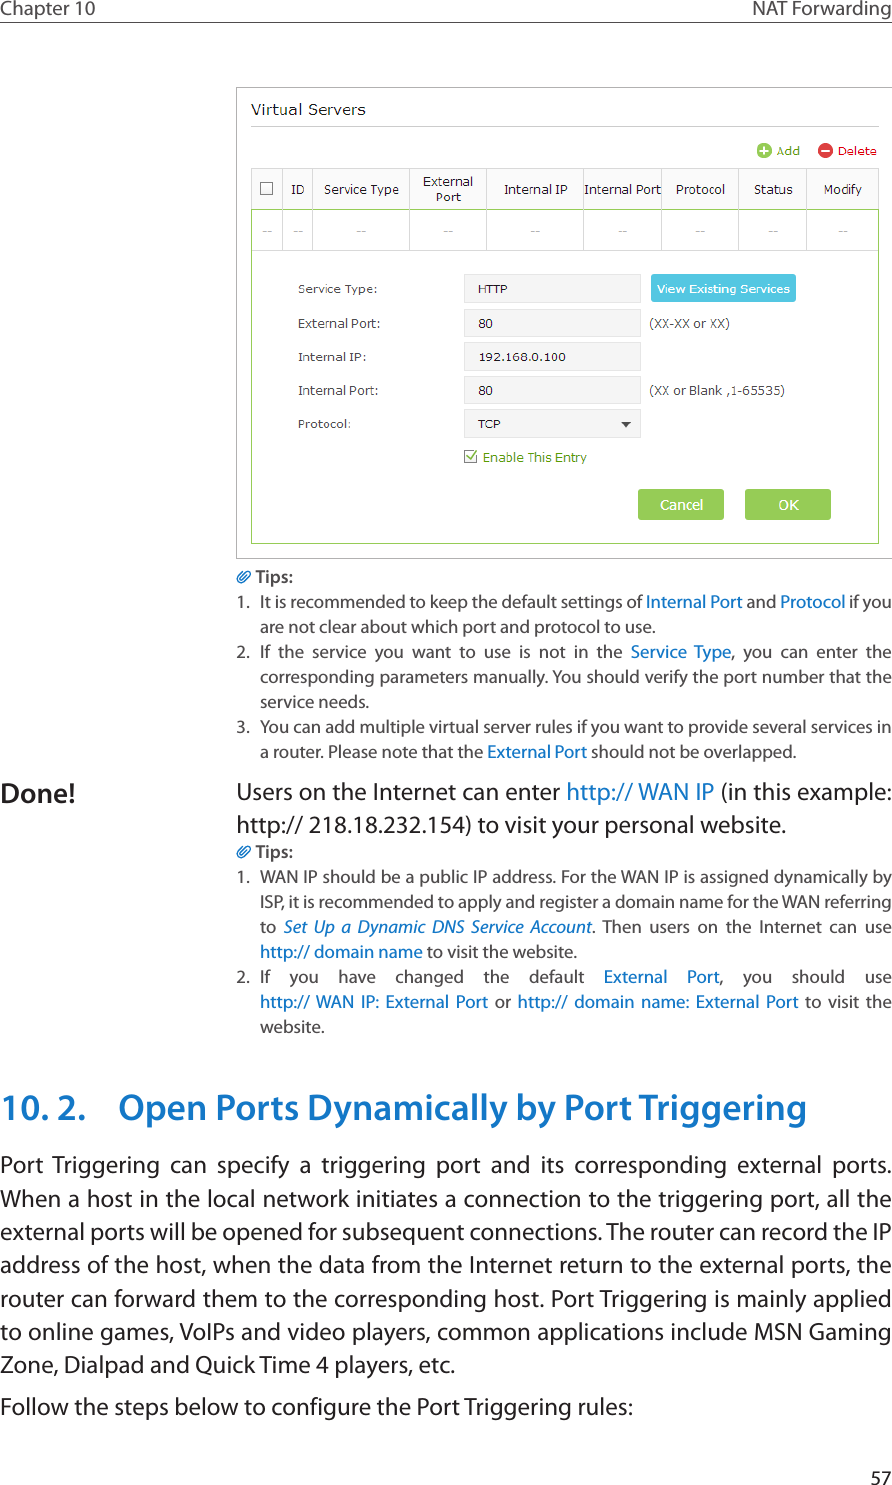 57Chapter 10 NAT ForwardingTips:1.  It is recommended to keep the default settings of Internal Port and Protocol if you are not clear about which port and protocol to use.2.  If the service you want to use is not in the Service Type, you can enter the corresponding parameters manually. You should verify the port number that the service needs.3.  You can add multiple virtual server rules if you want to provide several services in a router. Please note that the External Port should not be overlapped.Users on the Internet can enter http:// WAN IP (in this example: http:// 218.18.232.154) to visit your personal website.Tips:1.  WAN IP should be a public IP address. For the WAN IP is assigned dynamically by ISP, it is recommended to apply and register a domain name for the WAN referring to  Set Up a Dynamic DNS Service Account. Then users on the Internet can use  http:// domain name to visit the website.2.  If you have changed the default External Port, you should use  http:// WAN IP: External Port or http:// domain name: External Port to visit the website.10. 2.  Open Ports Dynamically by Port TriggeringPort Triggering can specify a triggering port and its corresponding external ports. When a host in the local network initiates a connection to the triggering port, all the external ports will be opened for subsequent connections. The router can record the IP address of the host, when the data from the Internet return to the external ports, the router can forward them to the corresponding host. Port Triggering is mainly applied to online games, VoIPs and video players, common applications include MSN Gaming Zone, Dialpad and Quick Time 4 players, etc. Follow the steps below to configure the Port Triggering rules:Done!